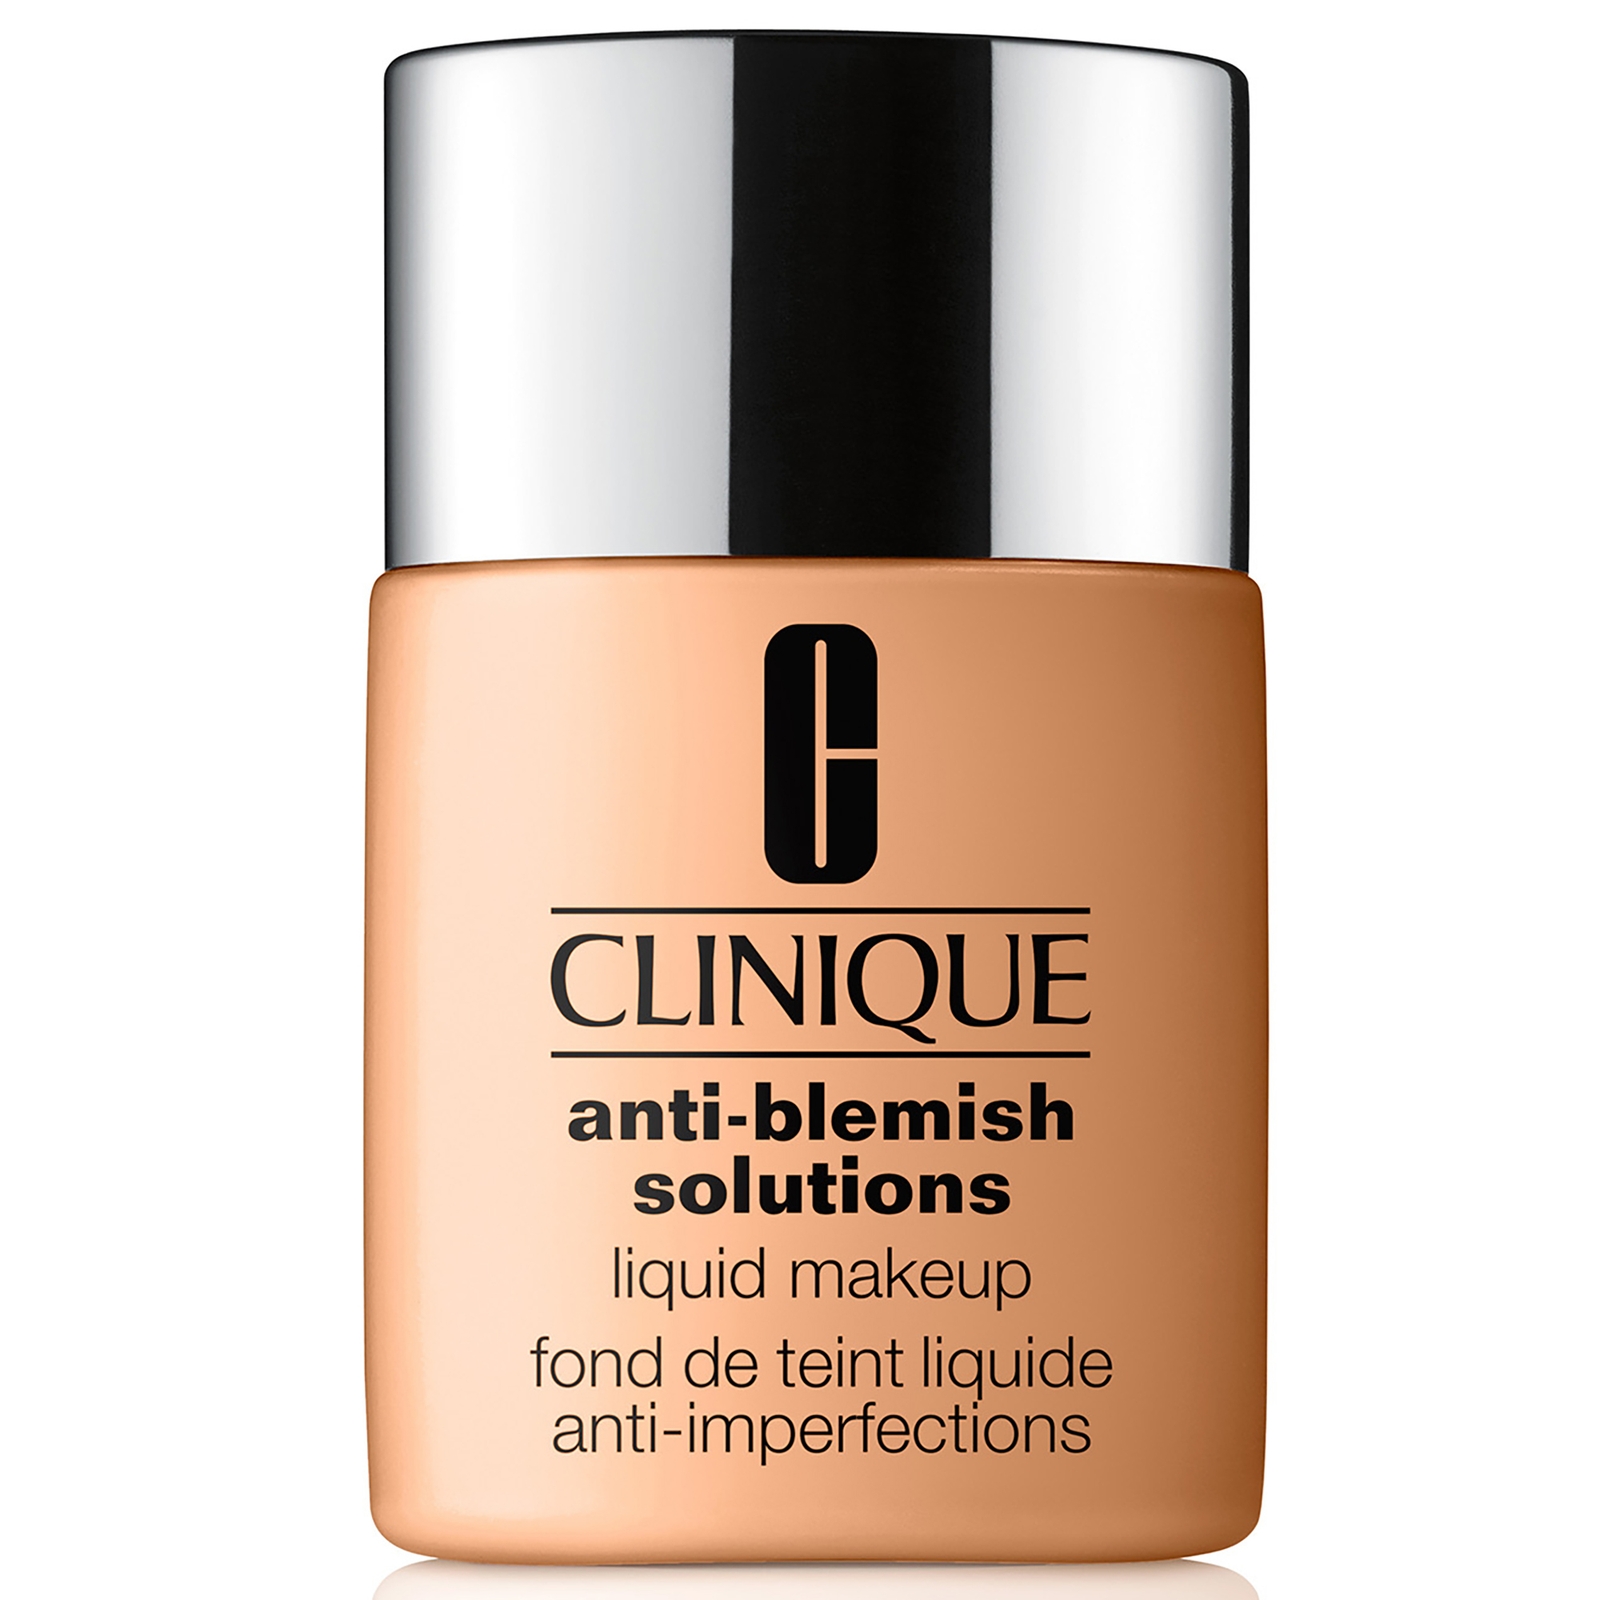 Clinique Anti-Blemish Solutions Liquid Makeup with Salicylic Acid 30ml (Various Shades) - WN 46 Gold